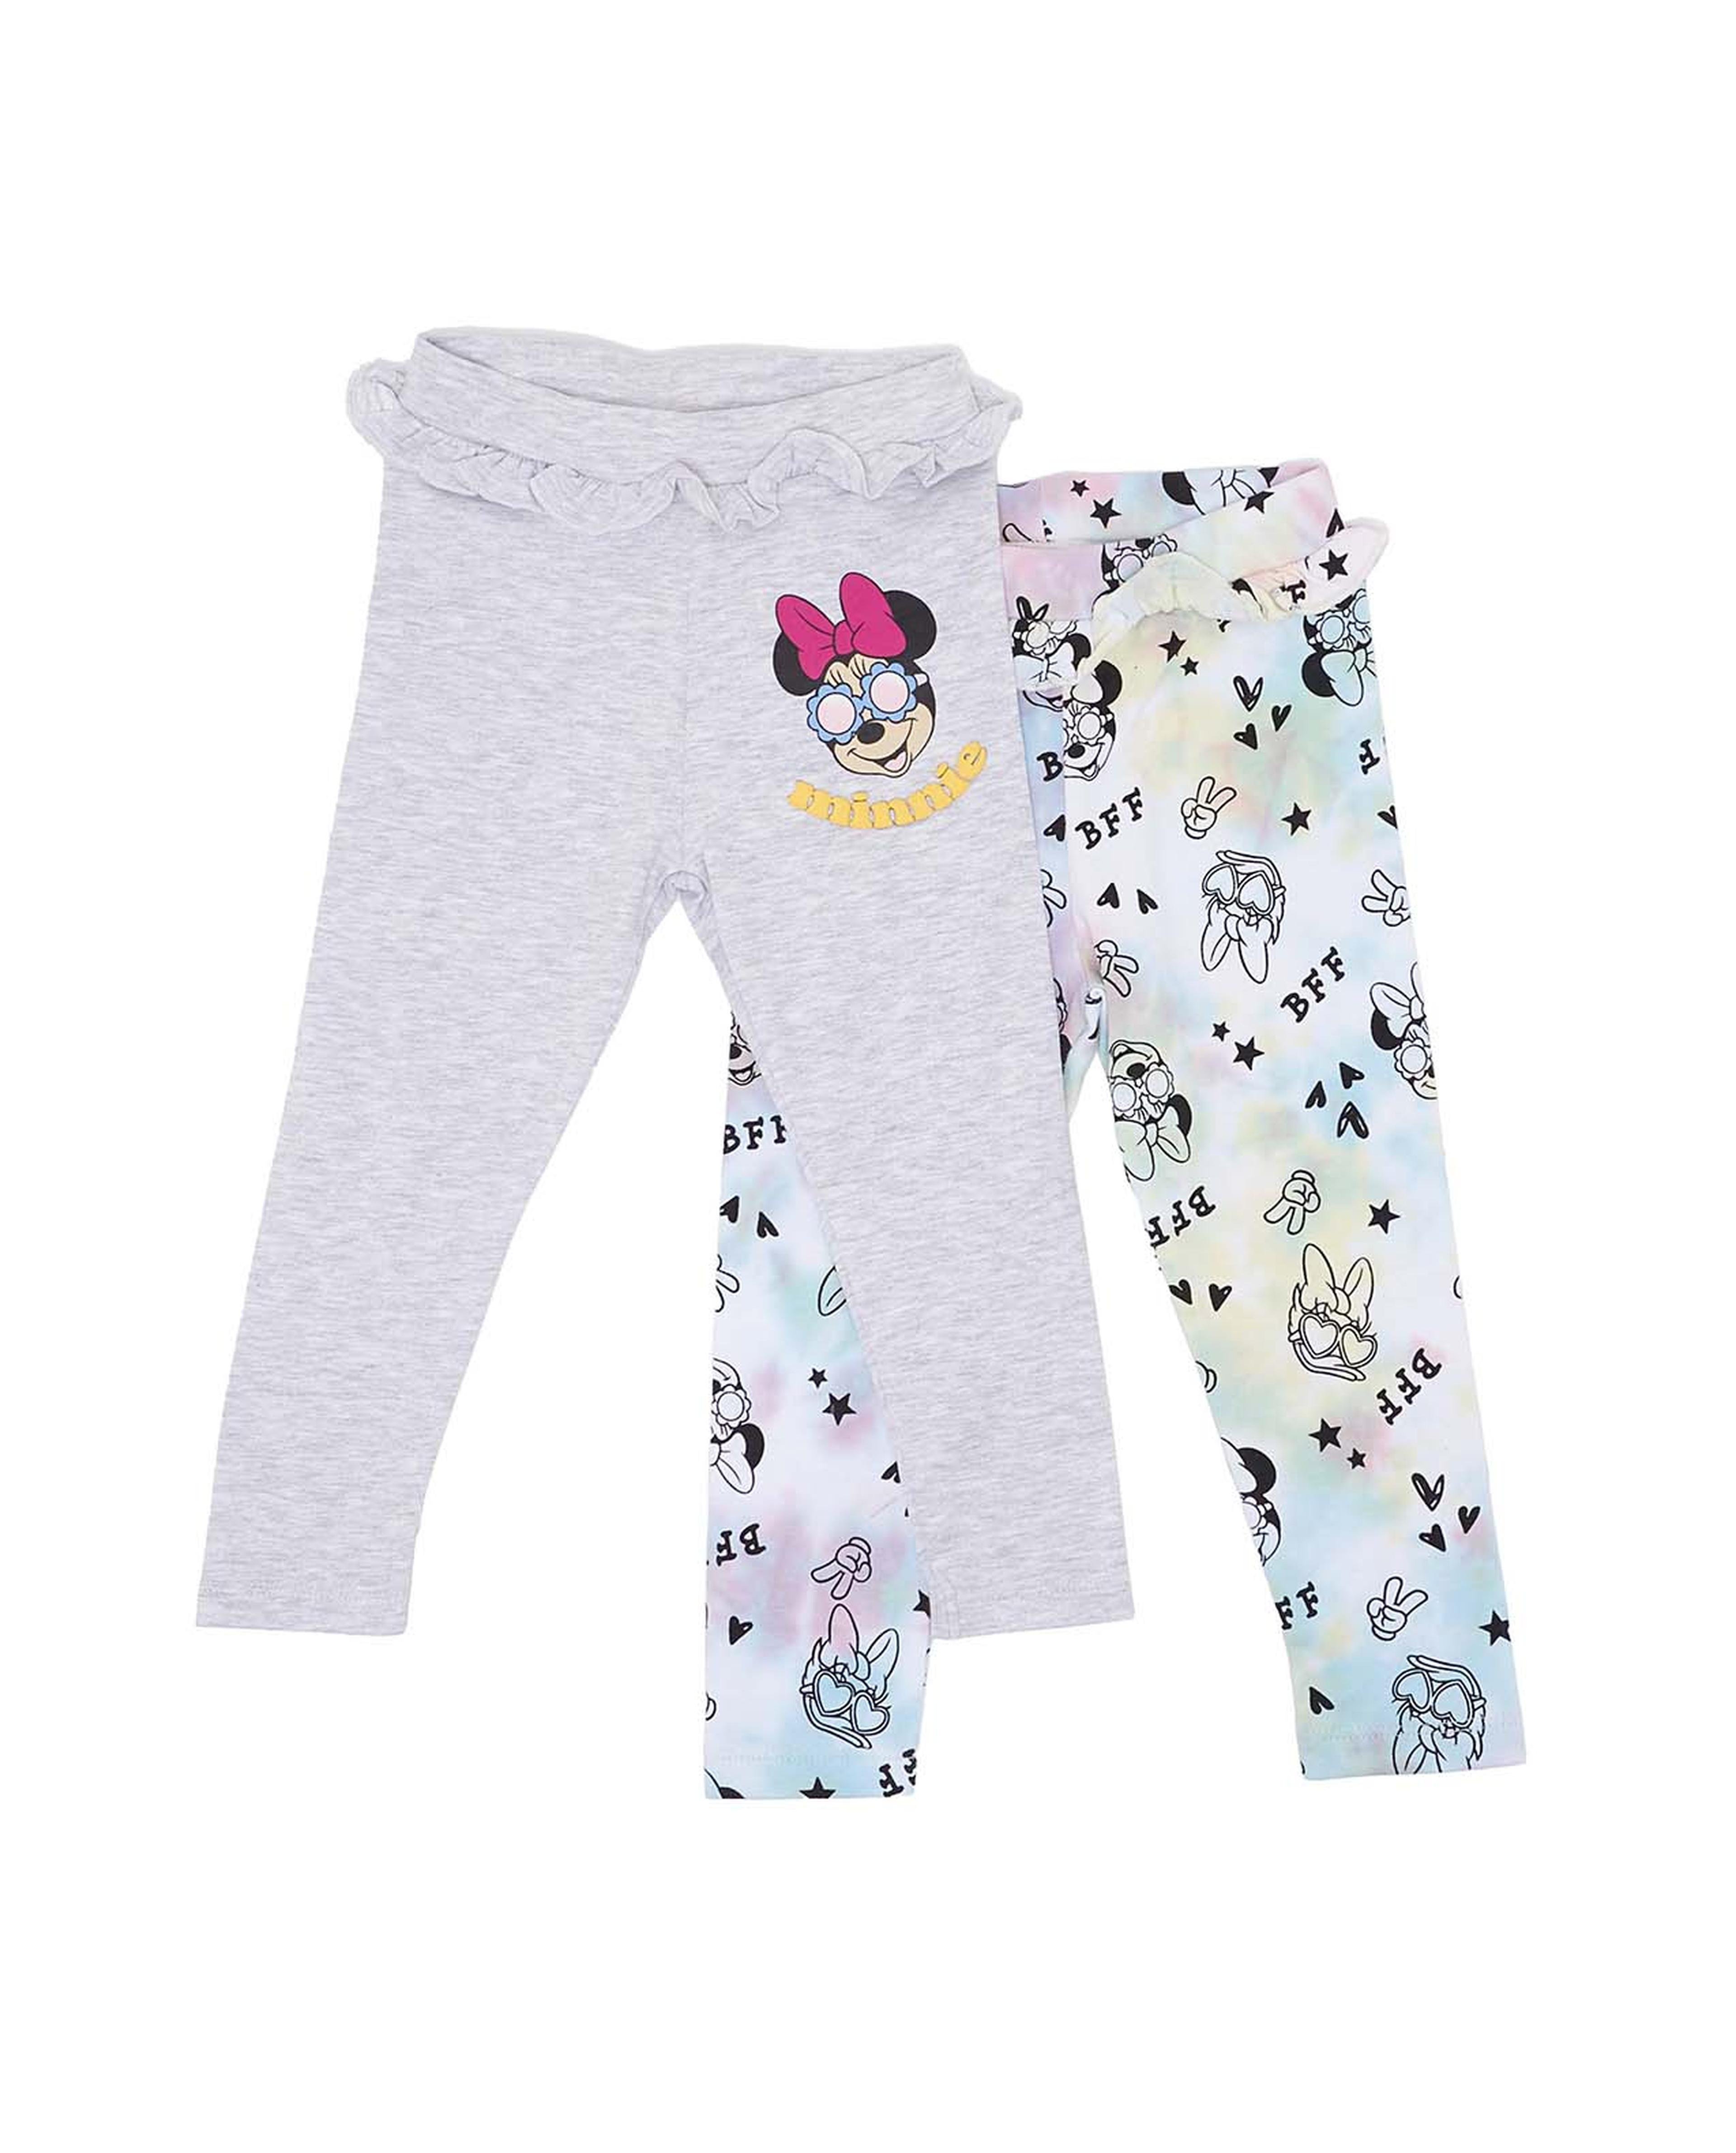 Minnie Mouse & Friends Printed Leggings